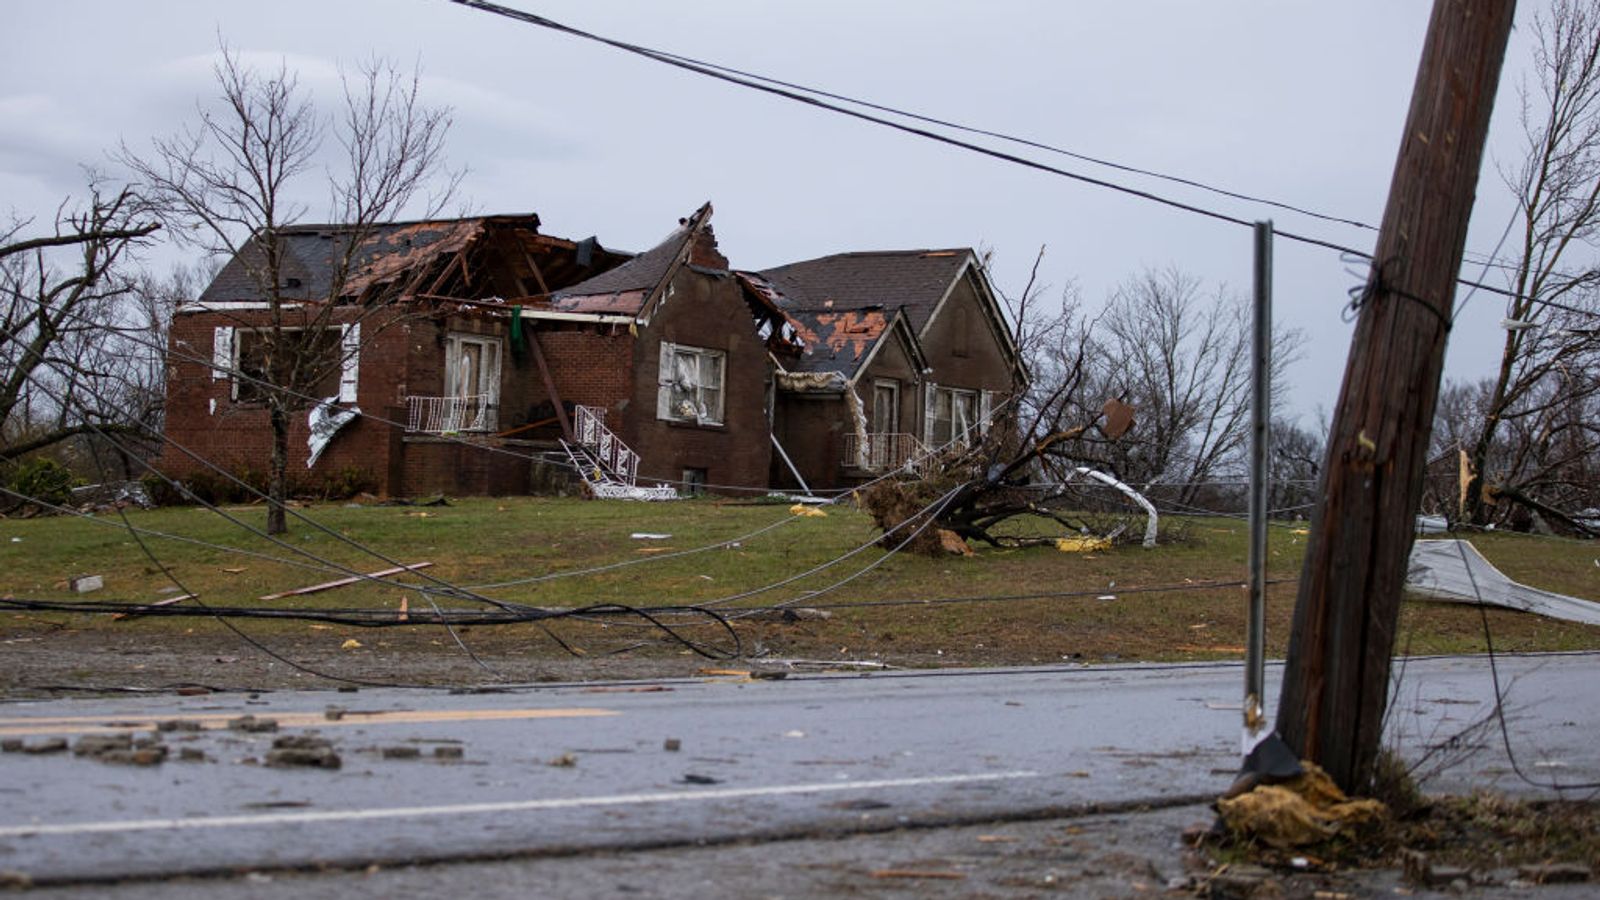 Search for survivors as 40 buildings collapse after deadly tornadoes